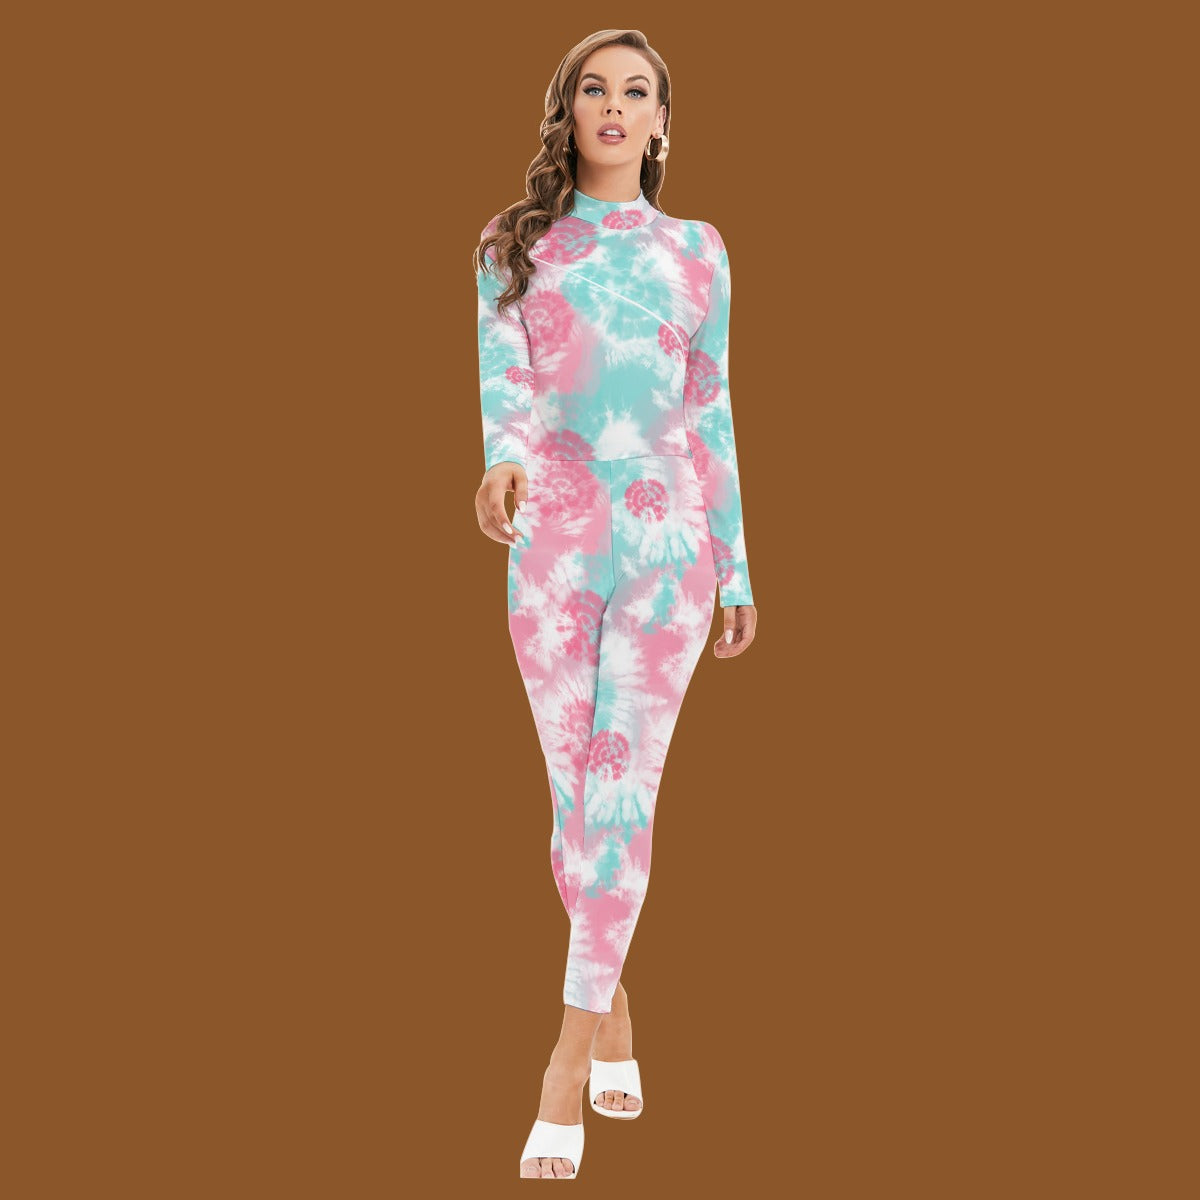 Long-sleeved High-neck Jumpsuit With Zipper - Tie dye